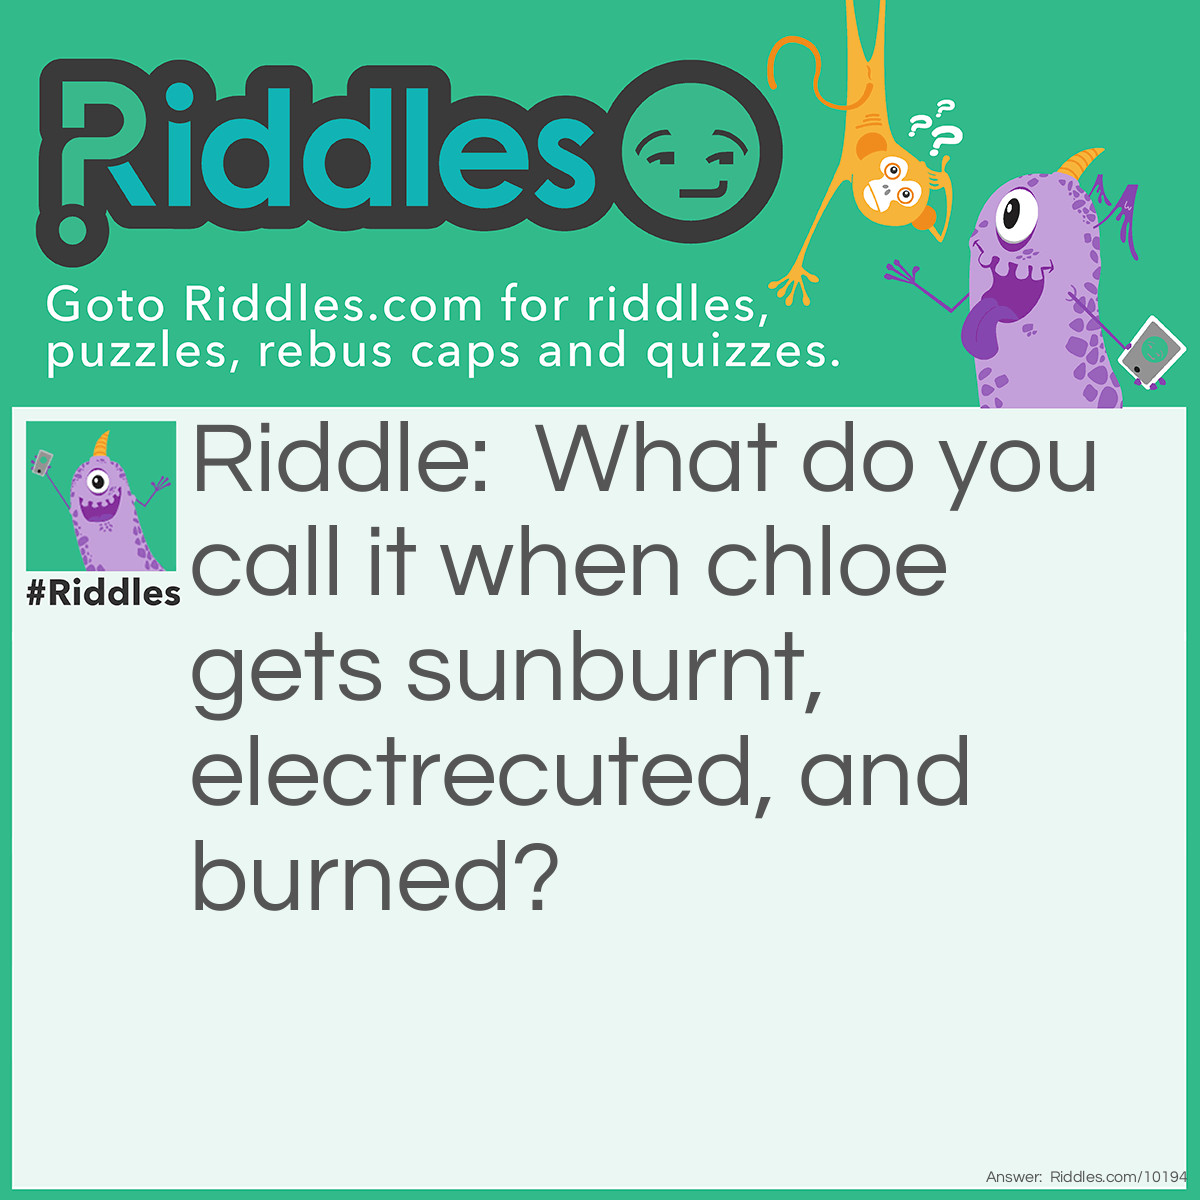 Riddle: What do you call it when chloe gets sunburnt, electrecuted, and burned? Answer: Barbechloe.